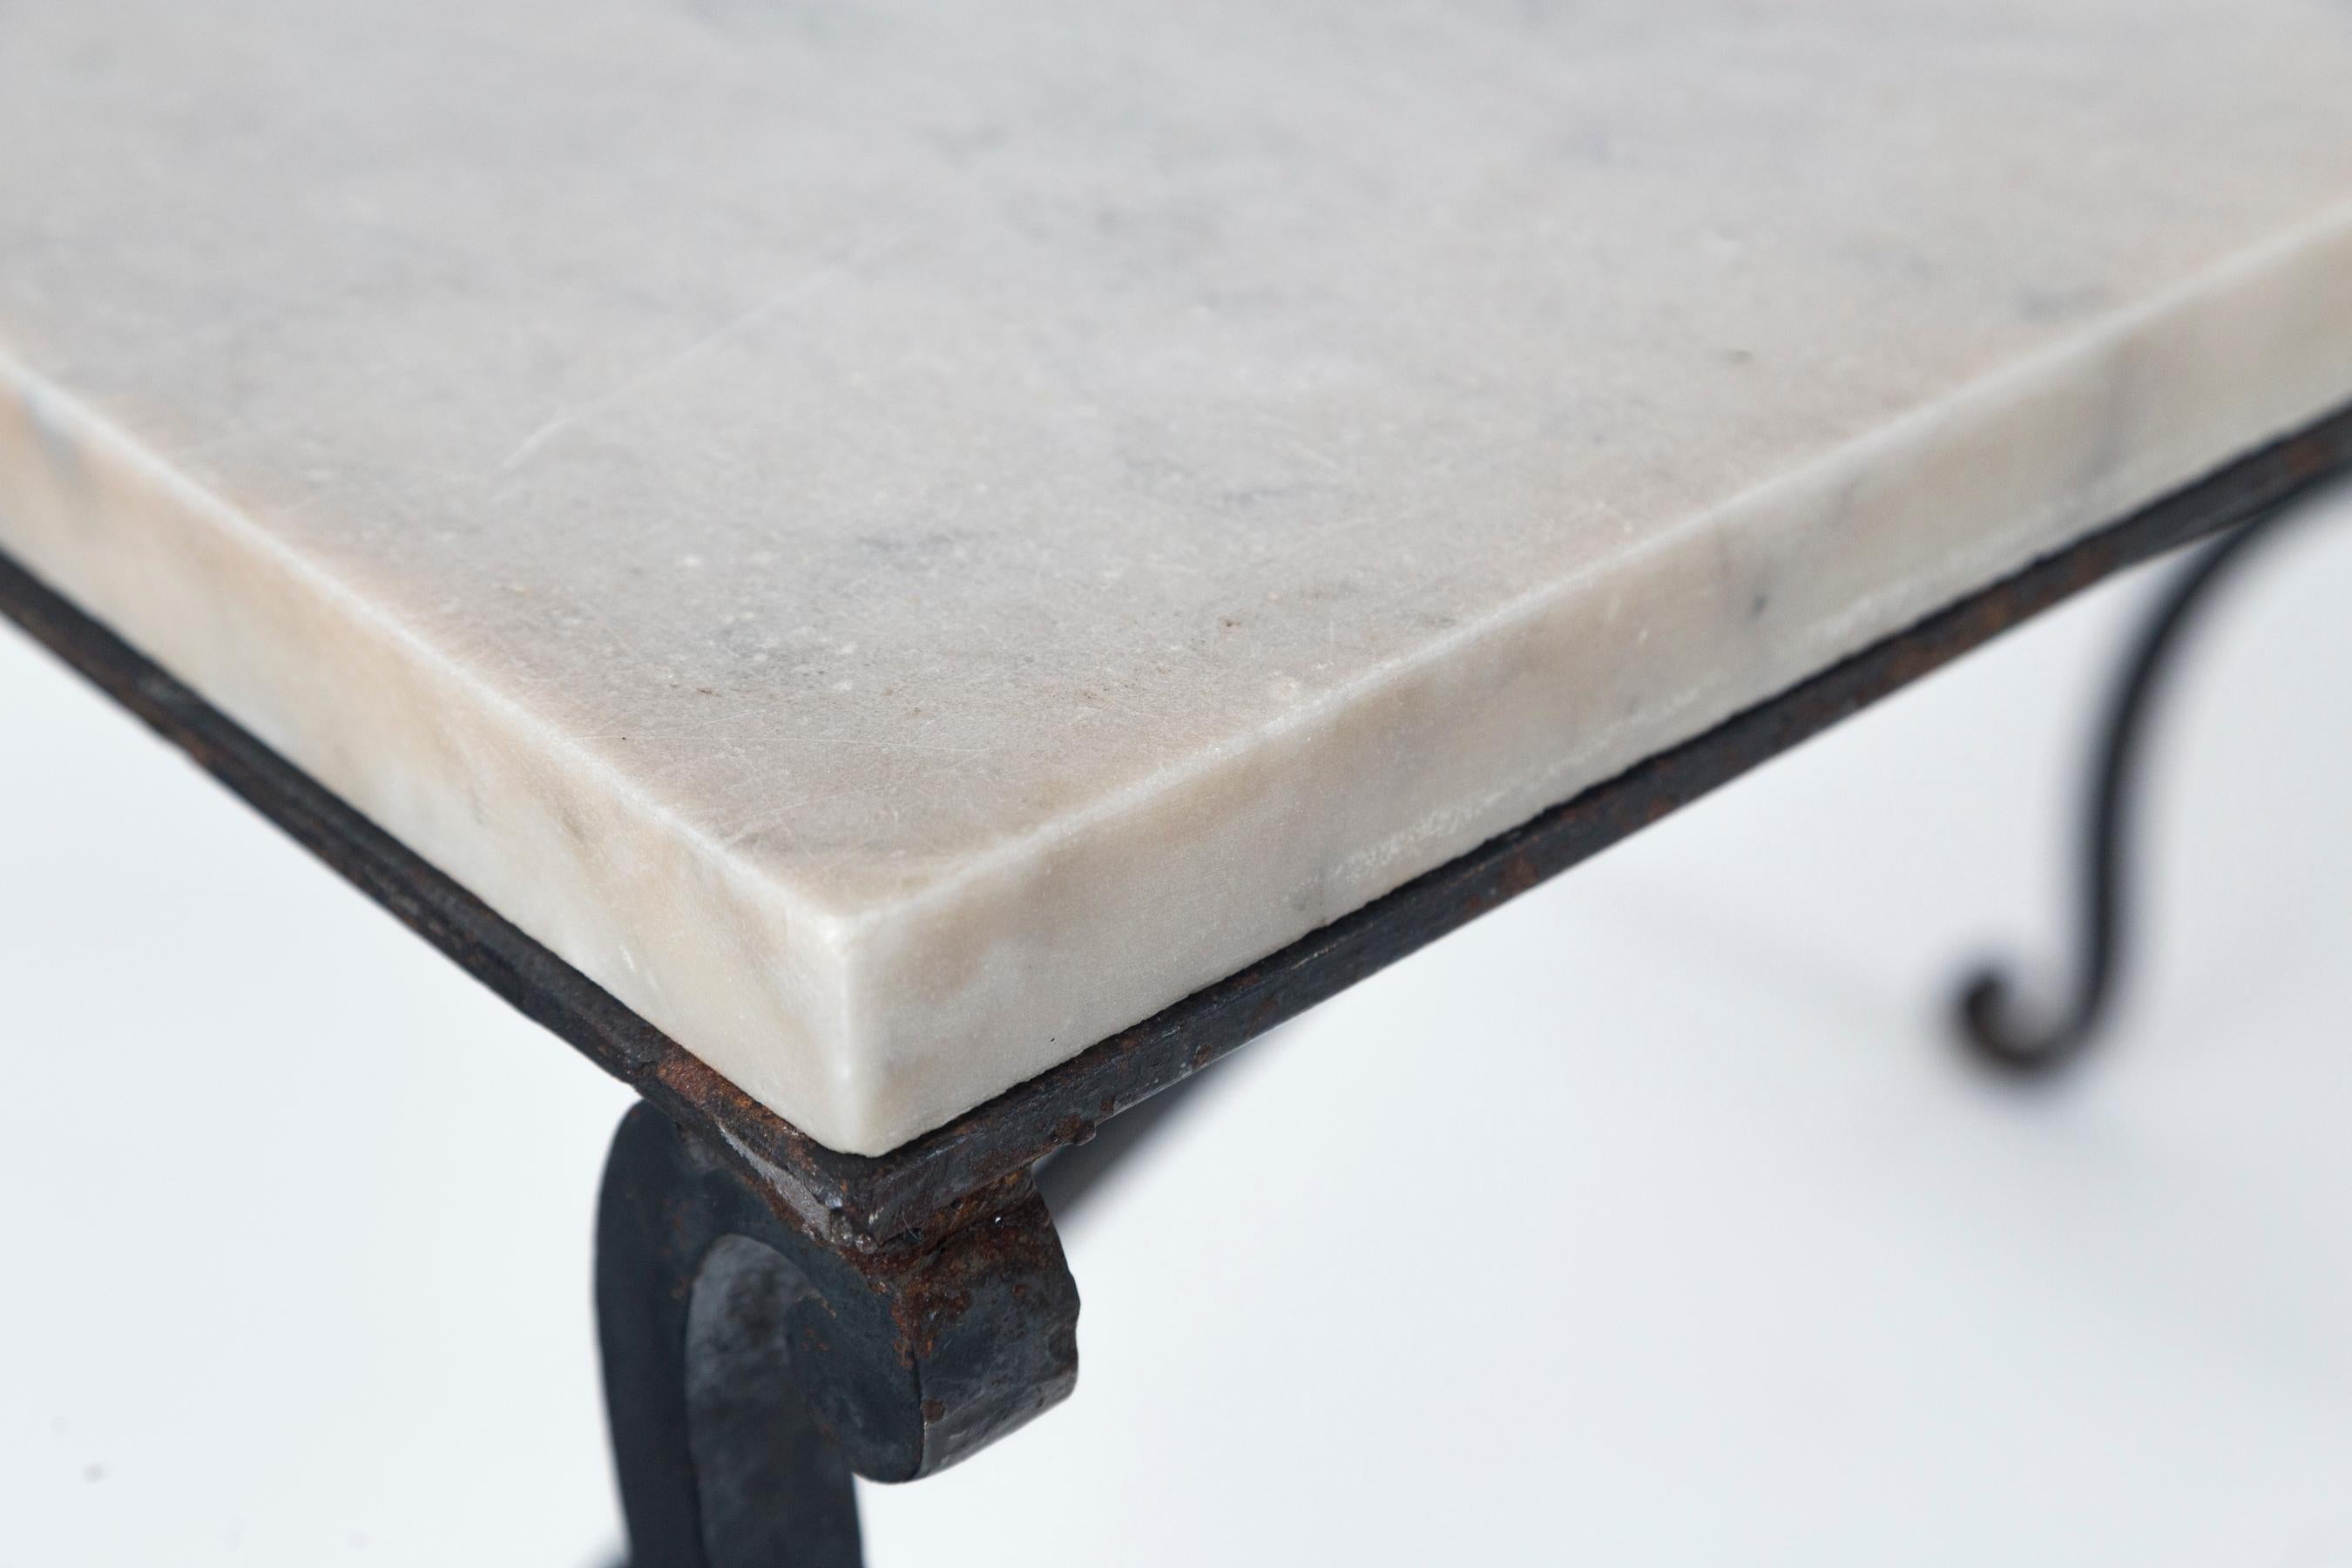 Marble top iron table, France, early 20th century. Original marble top on hand wrought iron base.